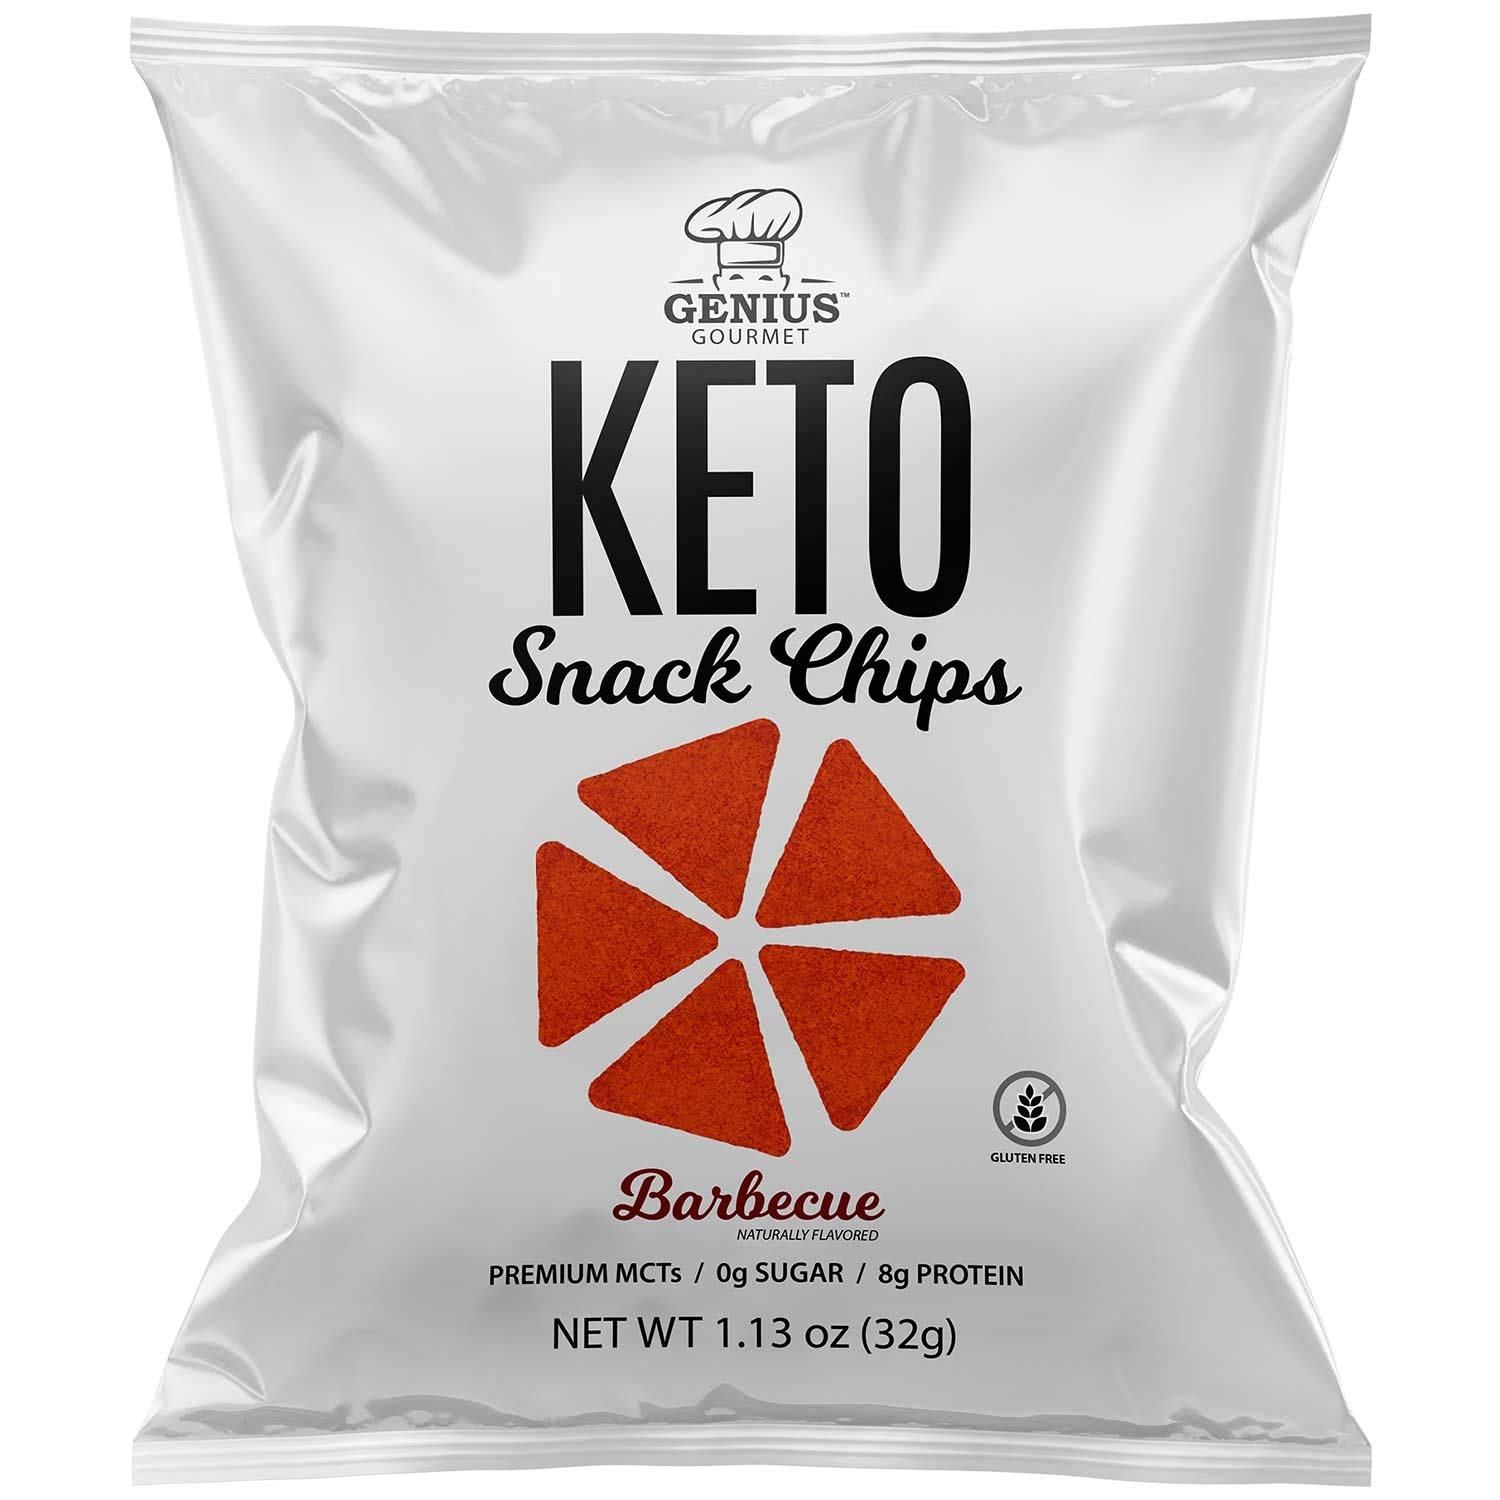 Genius Gourmet Protein Keto Chips, Low Carb, Premium MCTs, Gluten Free, Keto Snack (Barbecue), Pack of 8, 1.13 oz. (32 g) Each